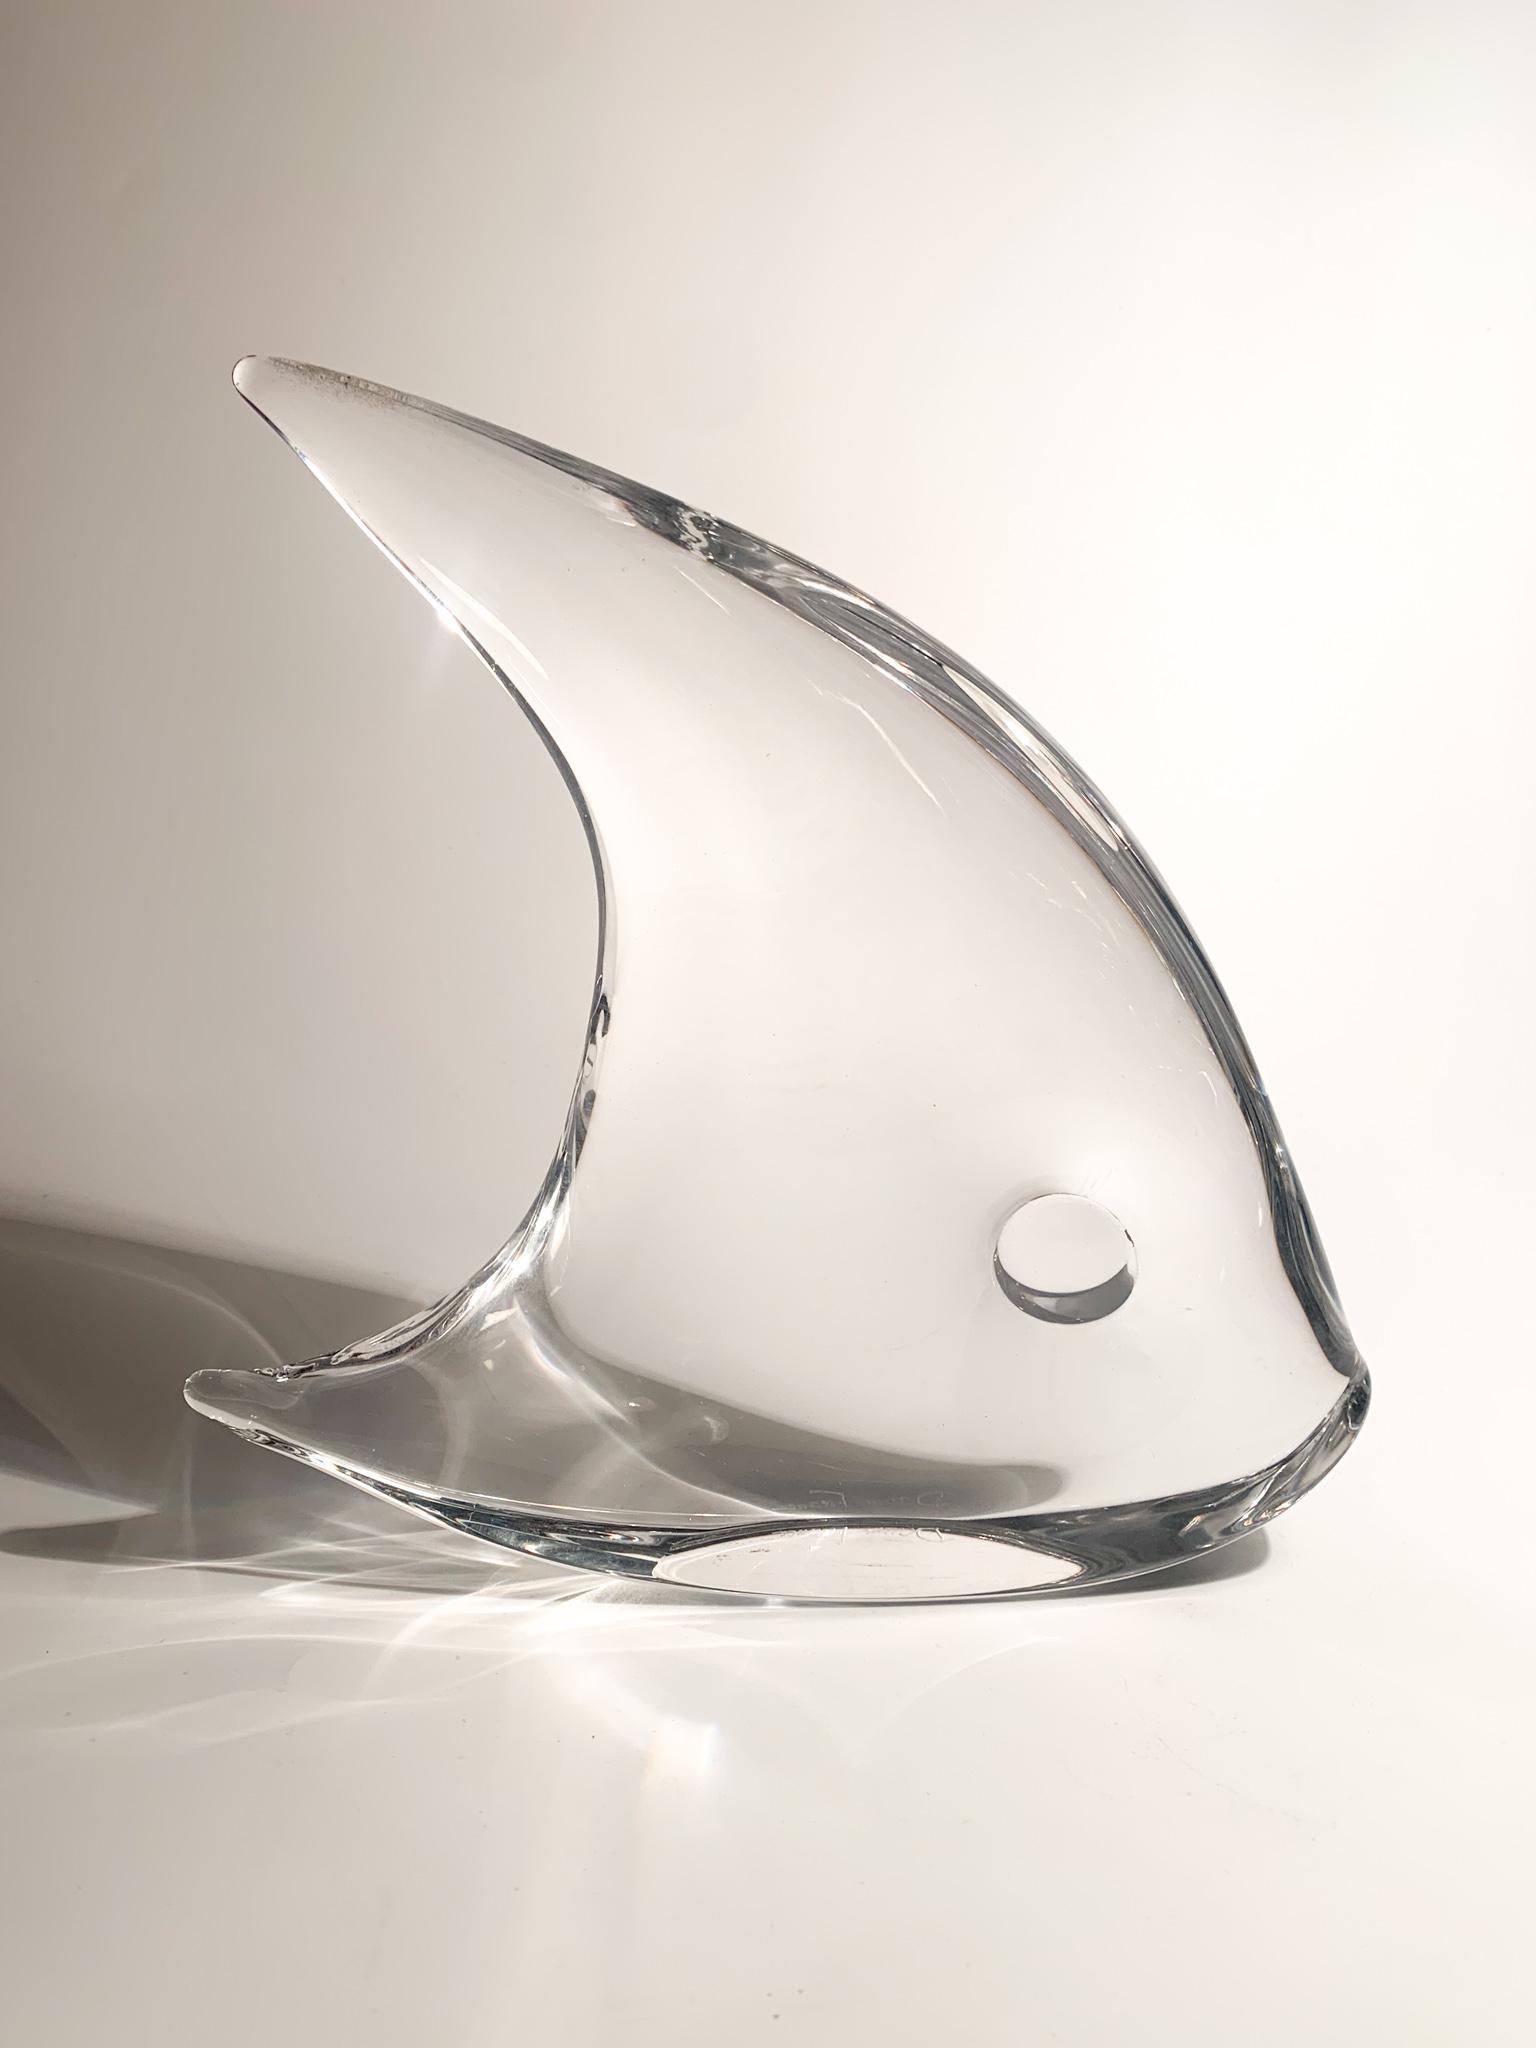 Sculpture depicting a fish in transparent Daum crystal, made in the 1950s

Ø cm 22 Ø cm 5 h cm 22

Daum It is a historic glass factory founded in France in 1878 by Jean Daum. 

From the very beginning he created crystal objects produced with